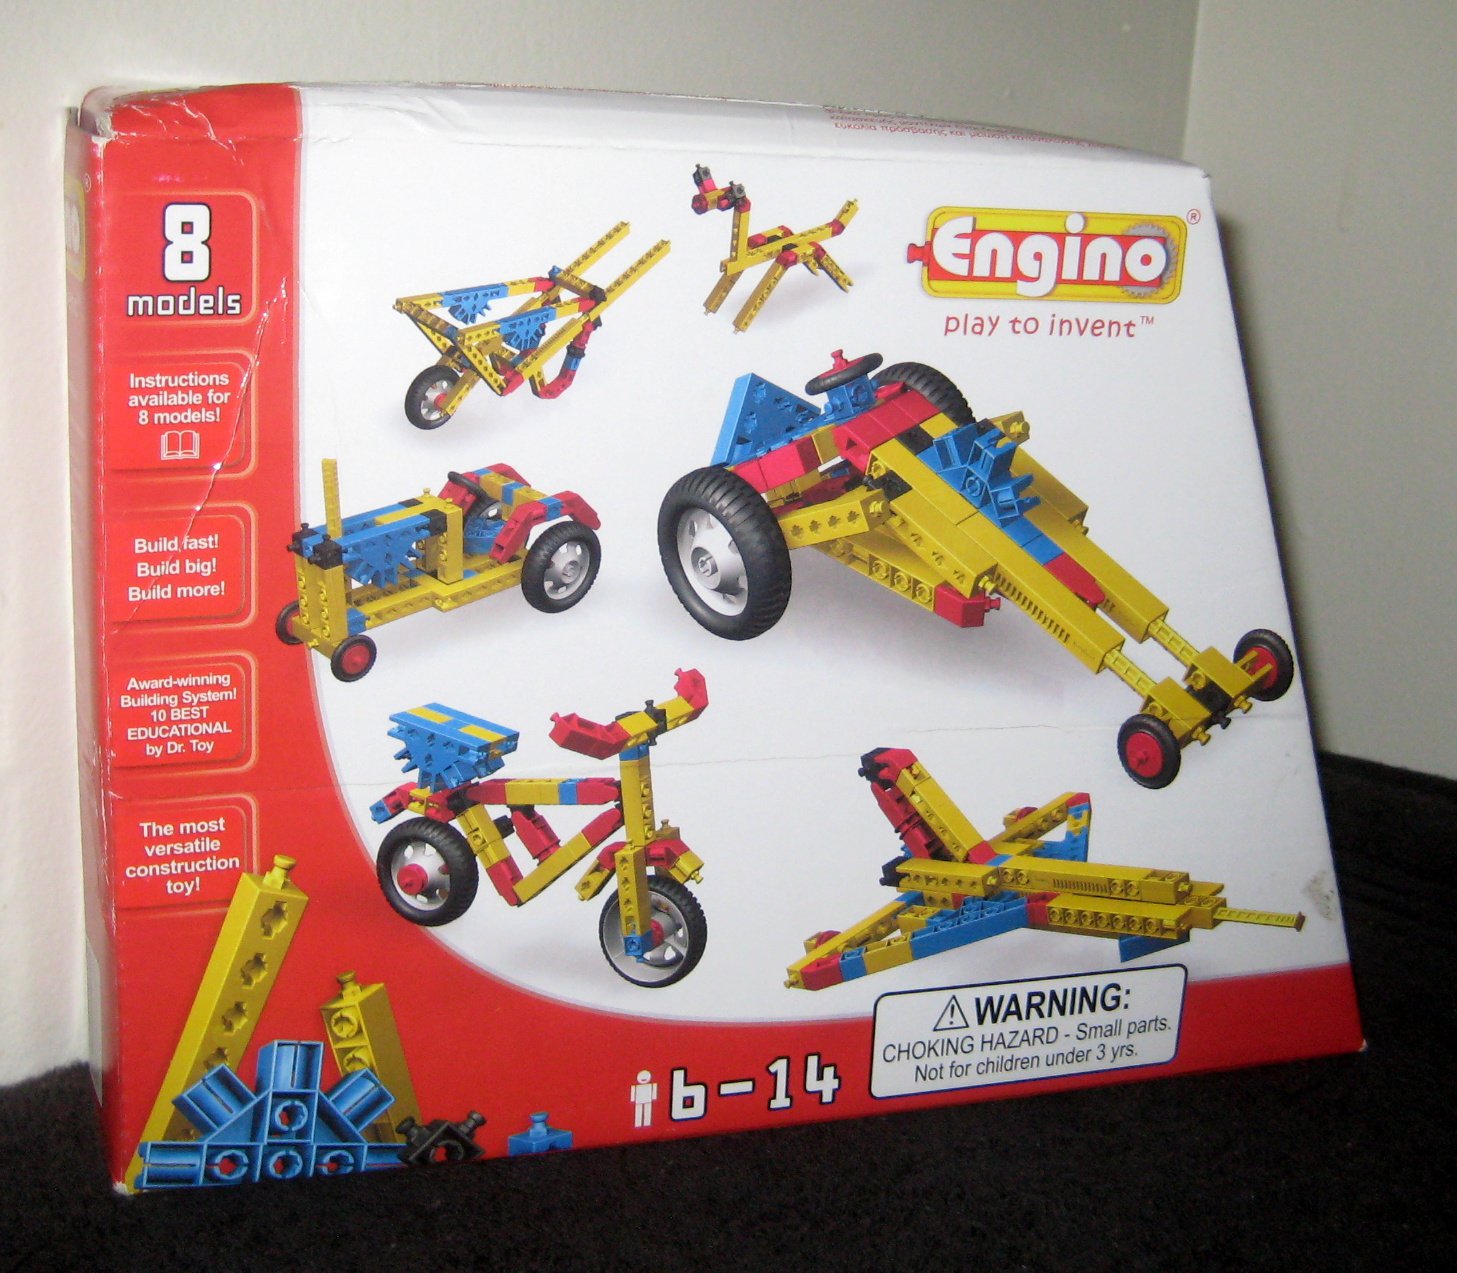 Engino ENG-0810 Model Building System Set Play to Invent Builds 8 Models Instructions Complete